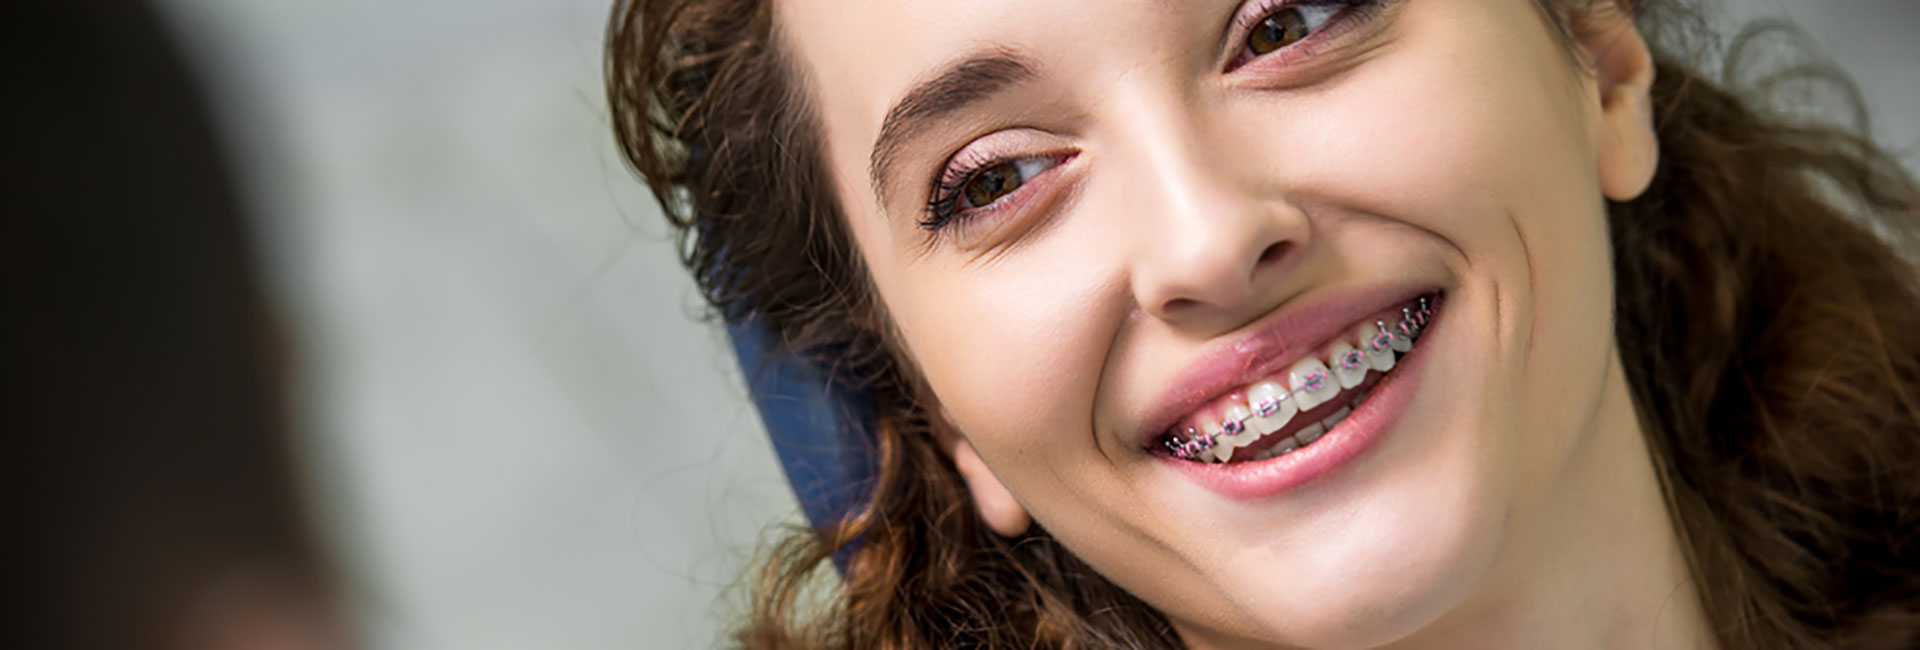 Straight talk about self-ligating braces, an “elastics-free” alternative to conventional orthodontic treatment